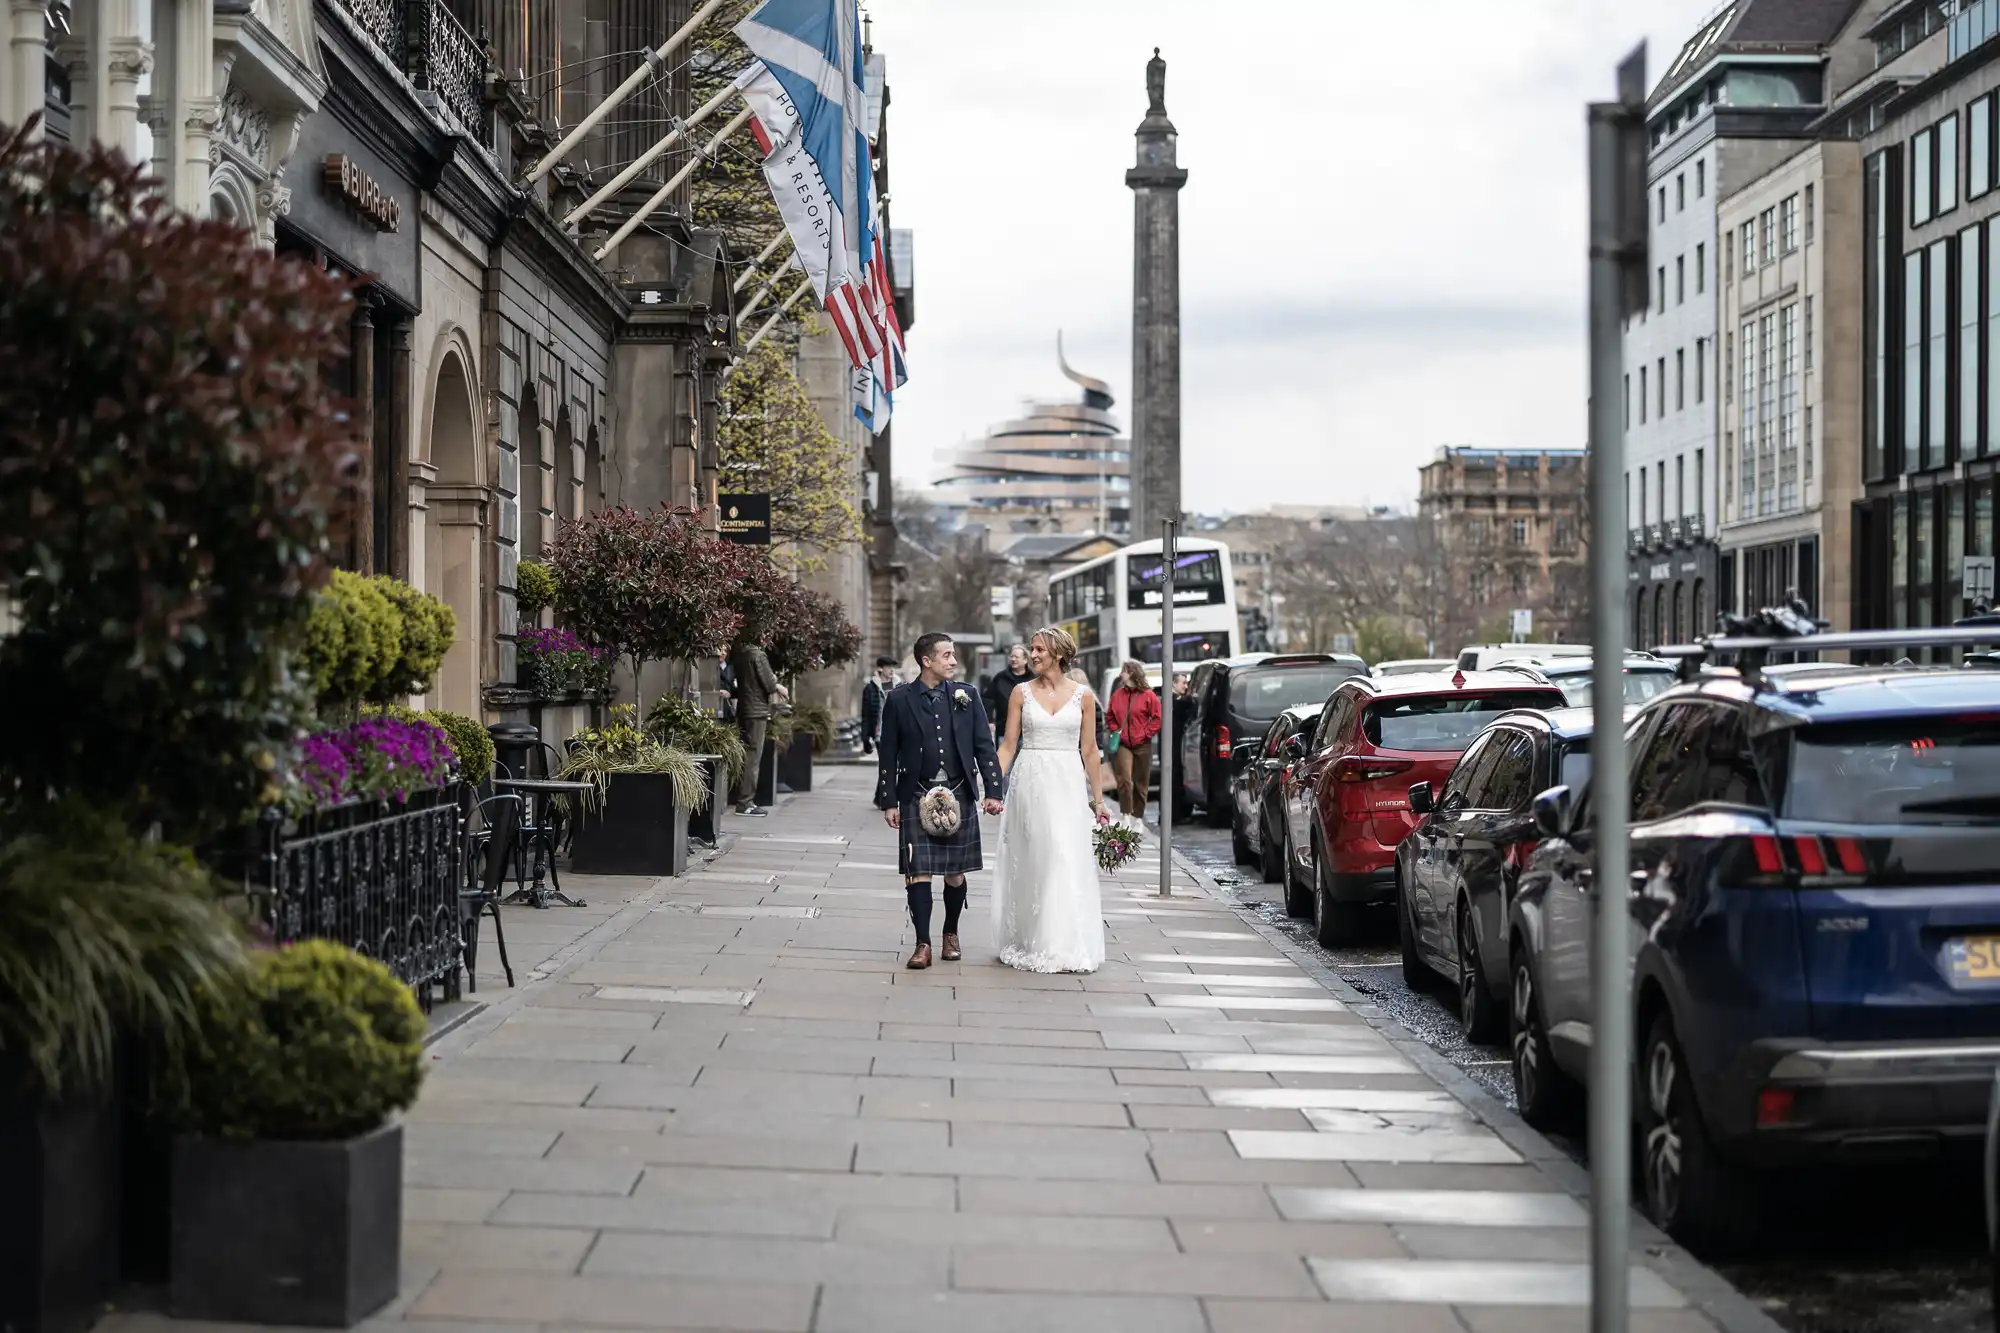 A couple in wedding attire walks down a city sidewalk, with buildings, parked cars, and flags in the background.